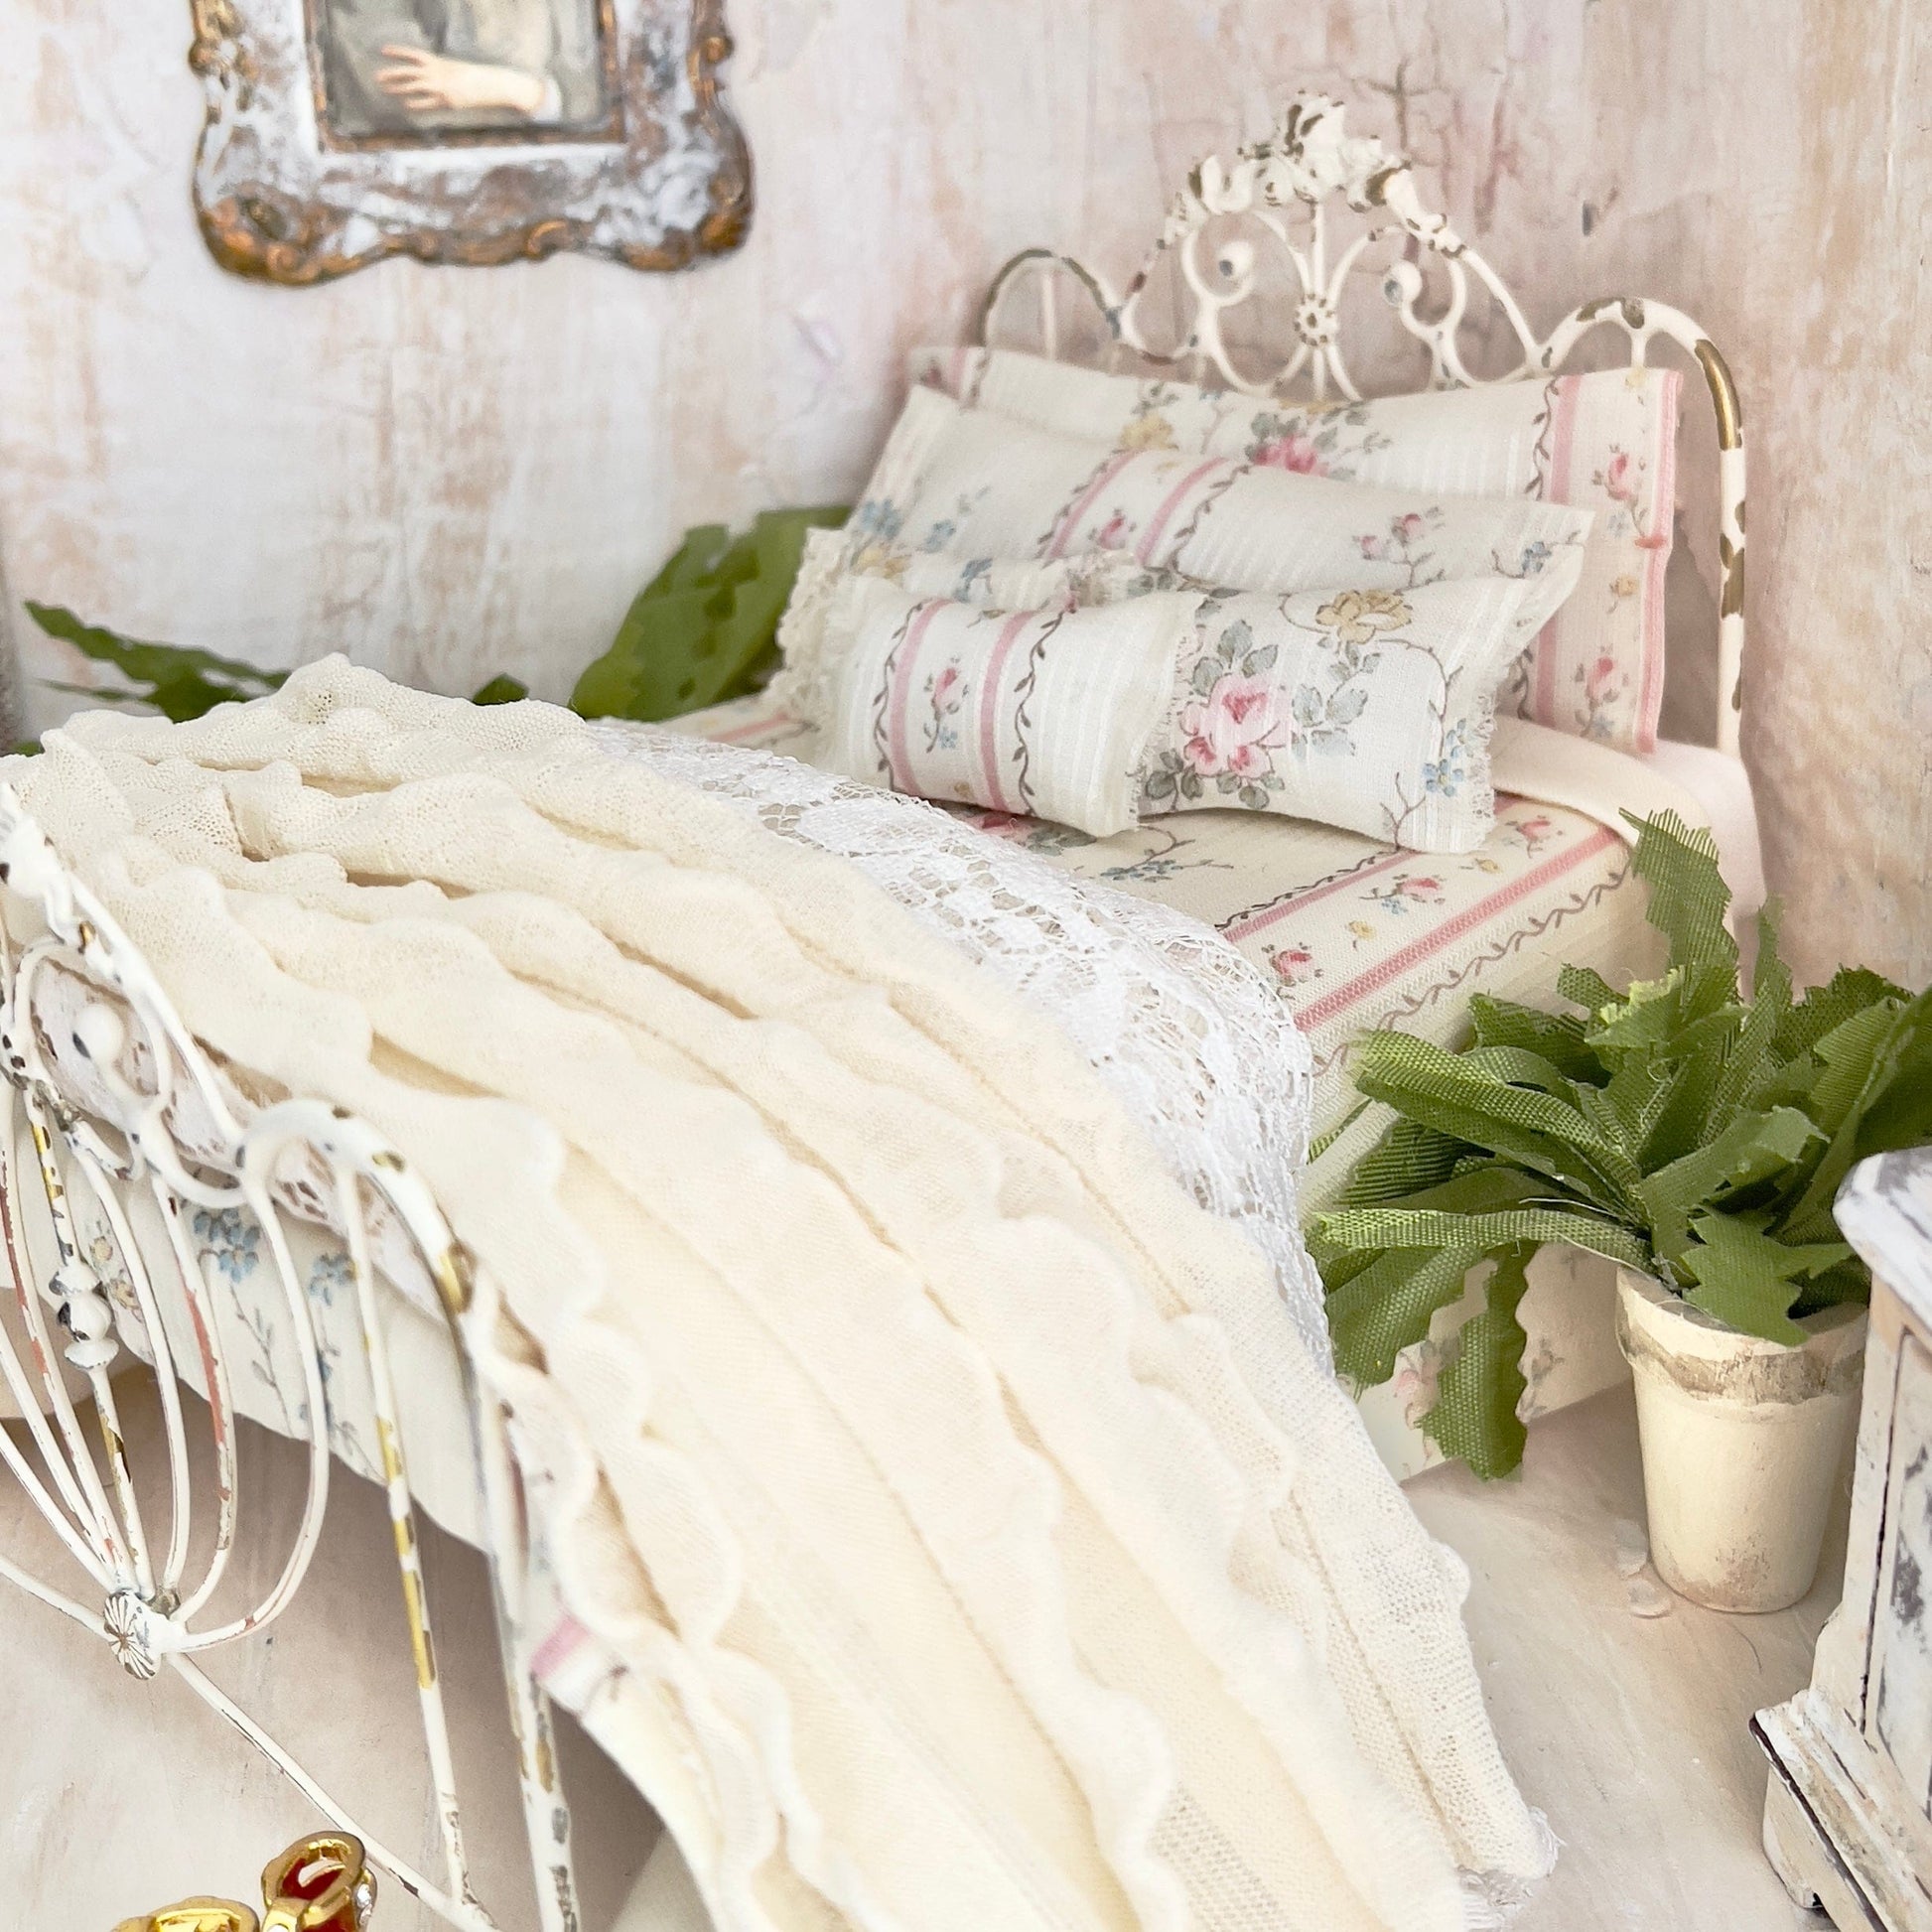 Chantallena Bedding Single Bedding Set (8 inch by 8 inch) Vintage View |  Dimity Cotton Set with Lace and Ruffled Throws | Dimi